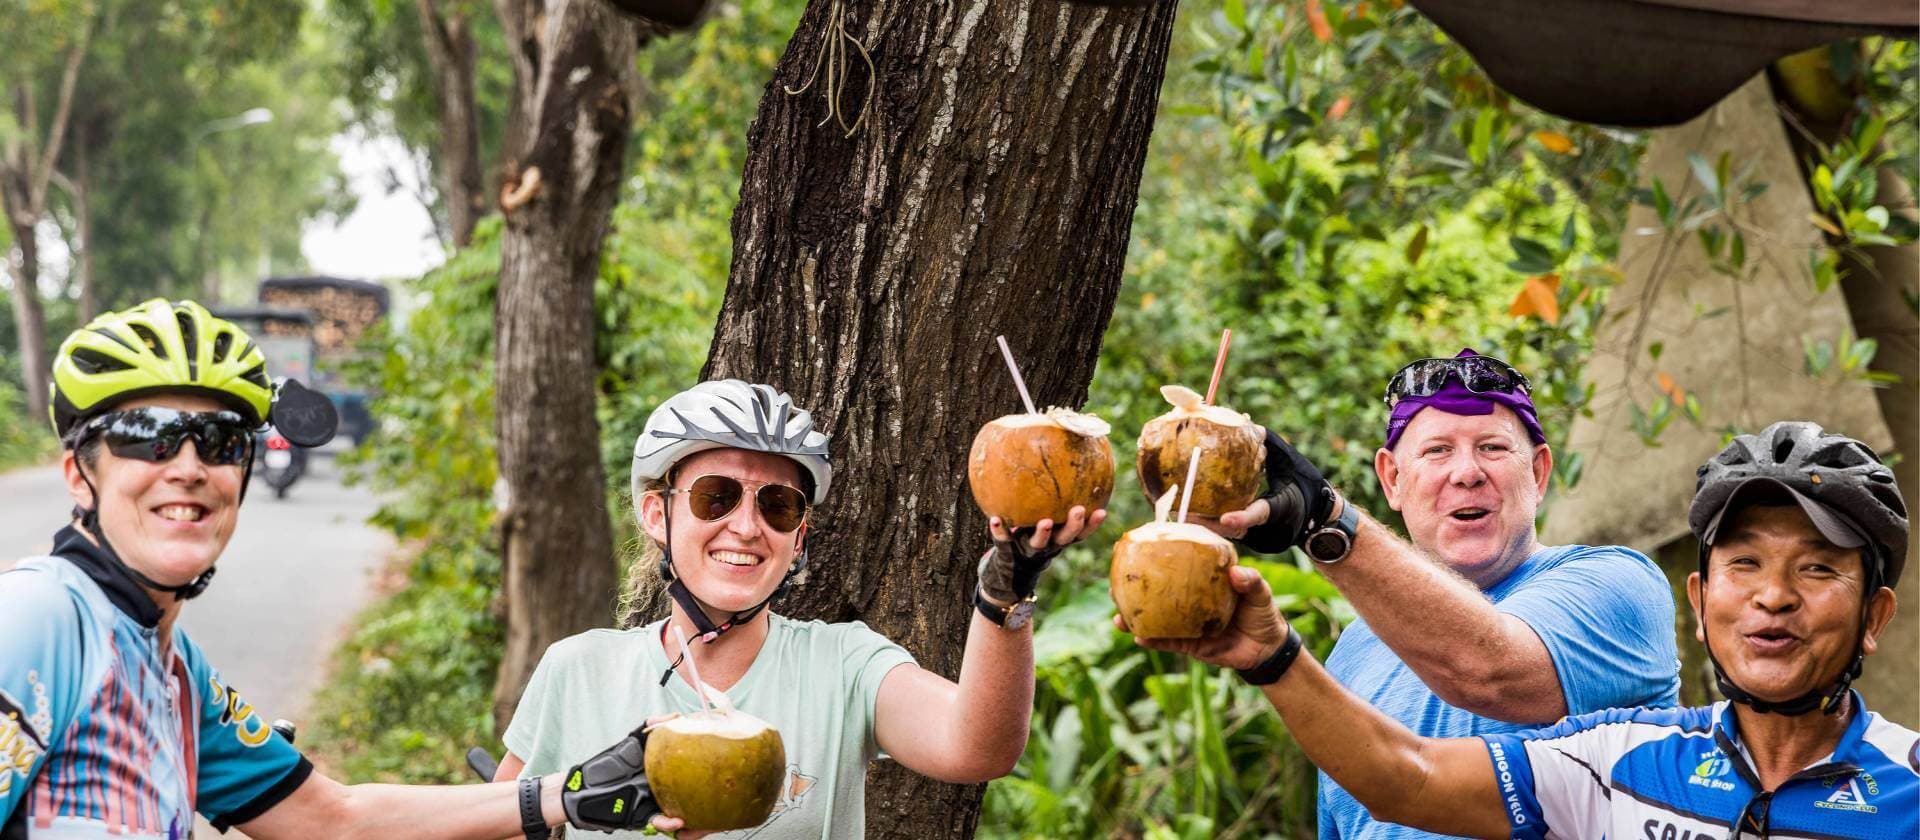 Tourists take a break with refreshment of drinking coconut water in the Trincomalee Cycling tour Sri Lanka